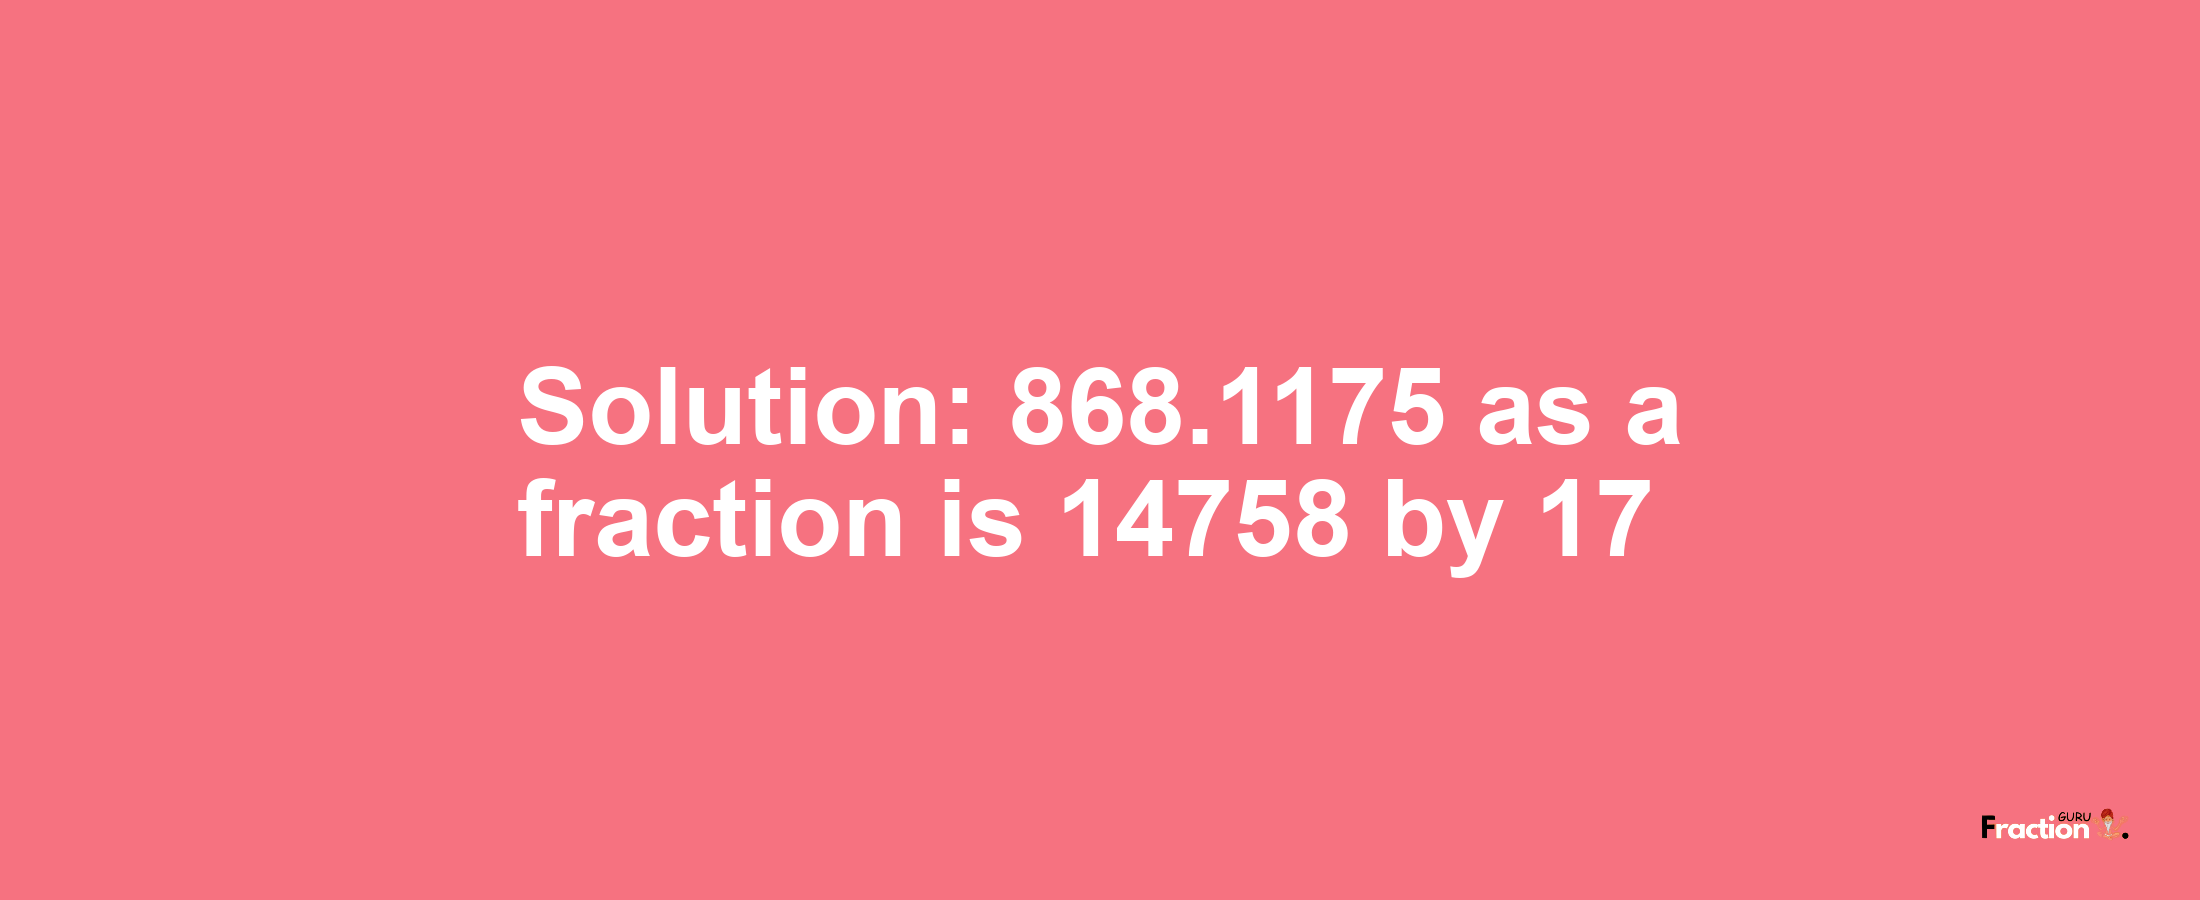 Solution:868.1175 as a fraction is 14758/17